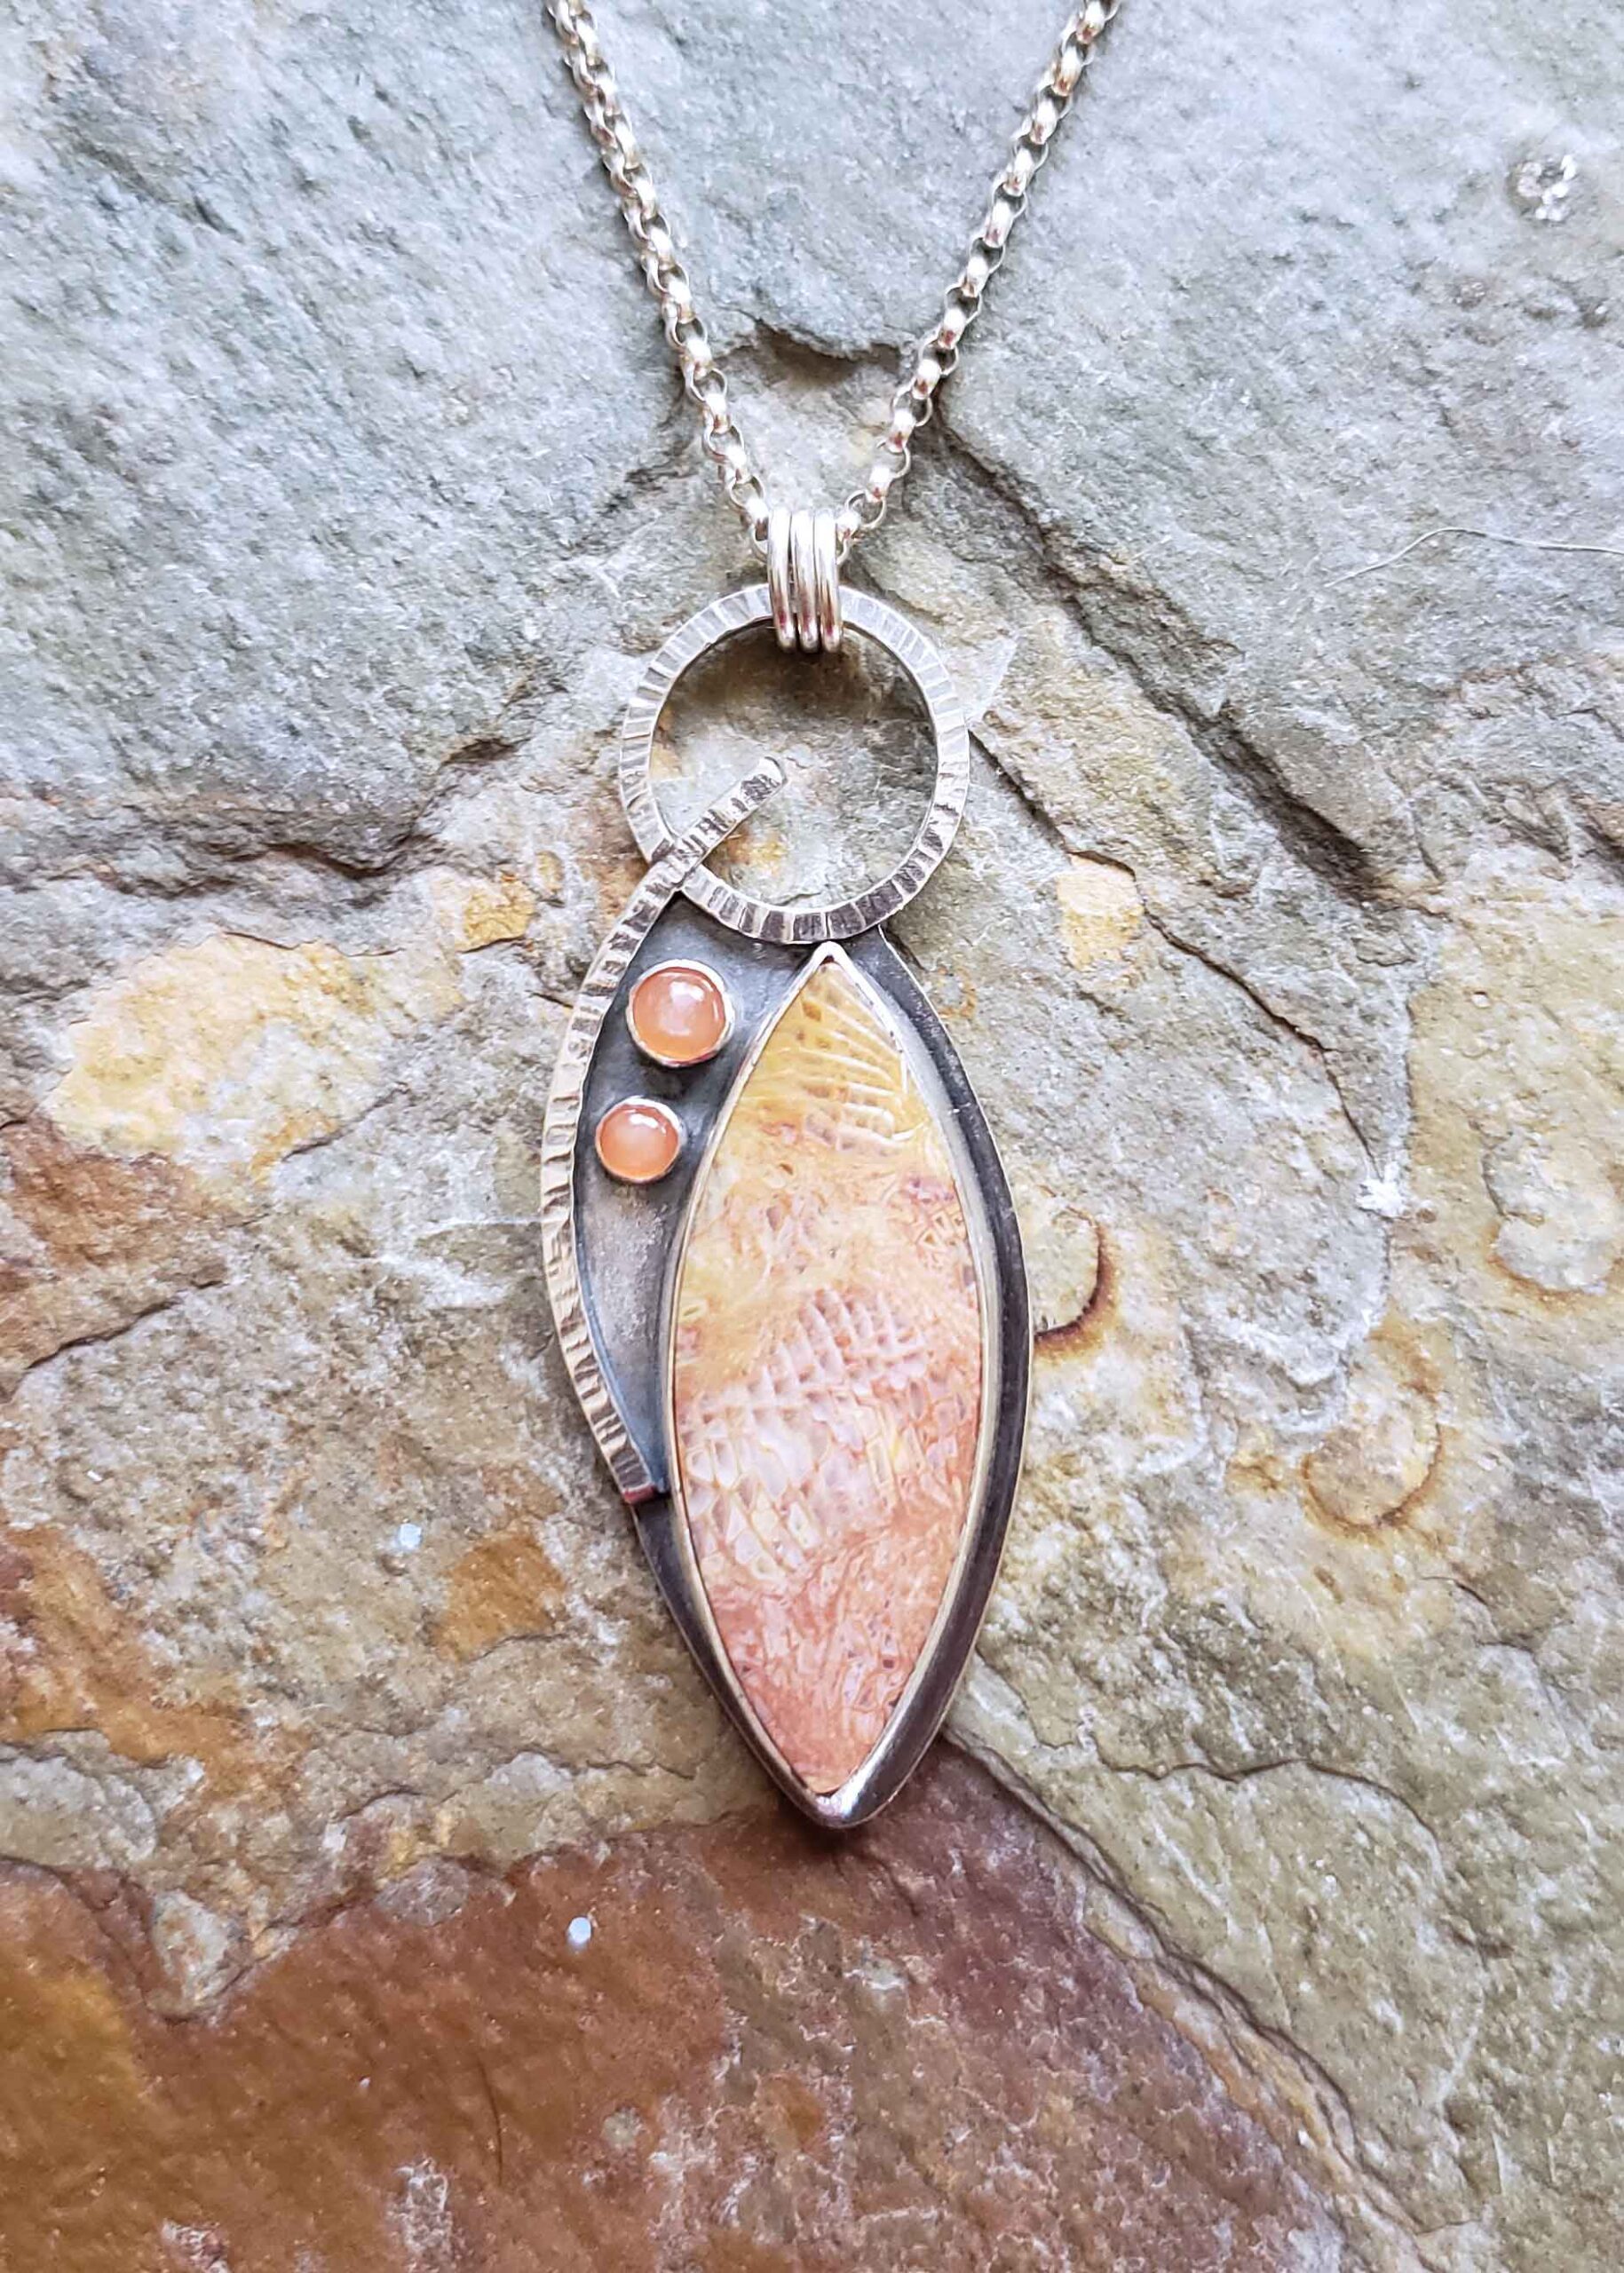 Silver pendant in peaches and cream by Dona Miller